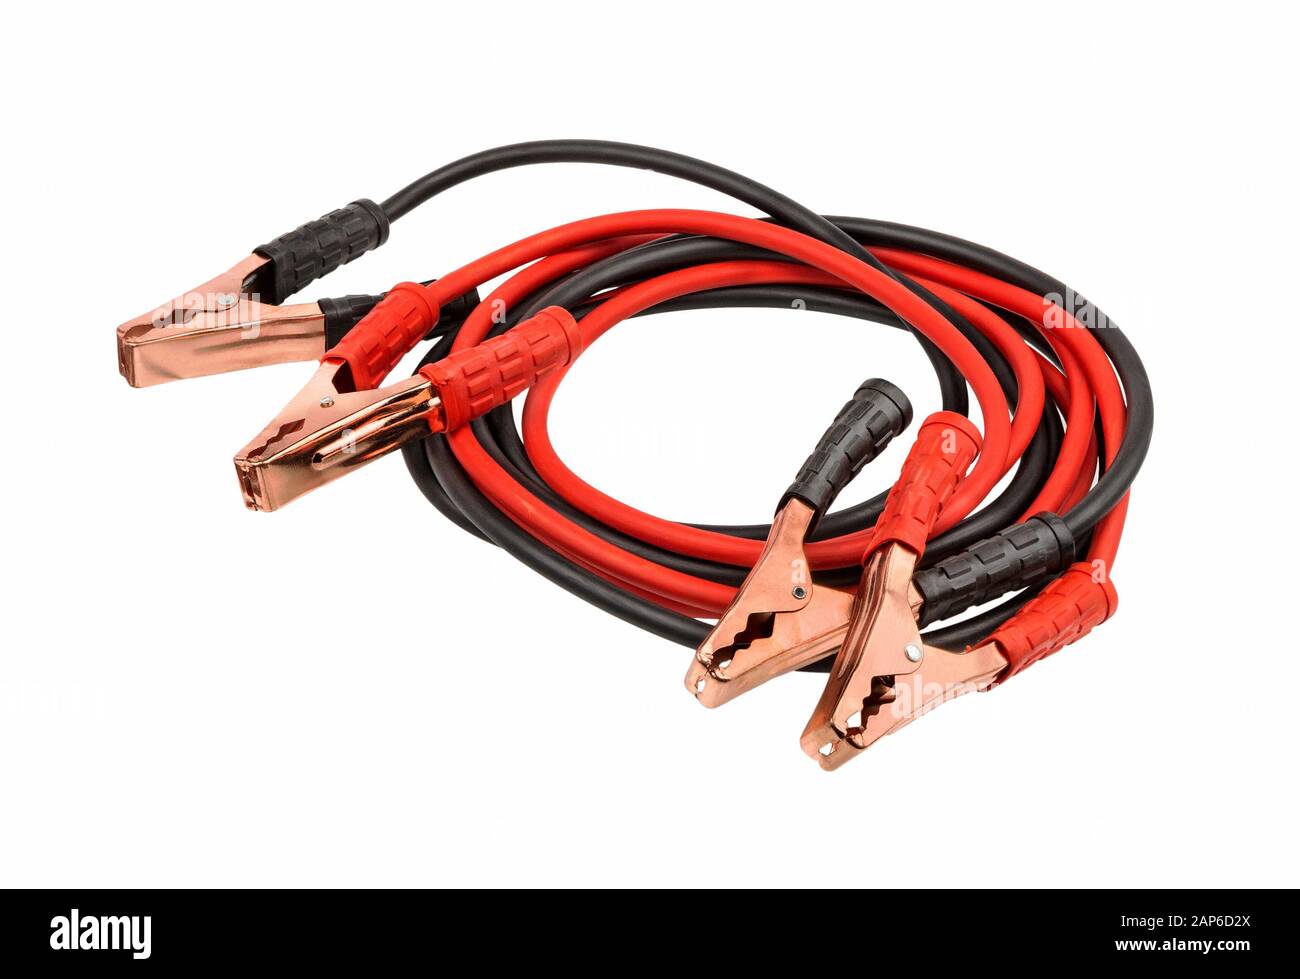 Jumper cable isolated on white background. Cable for car battery. Power supply wire. Stock Photo